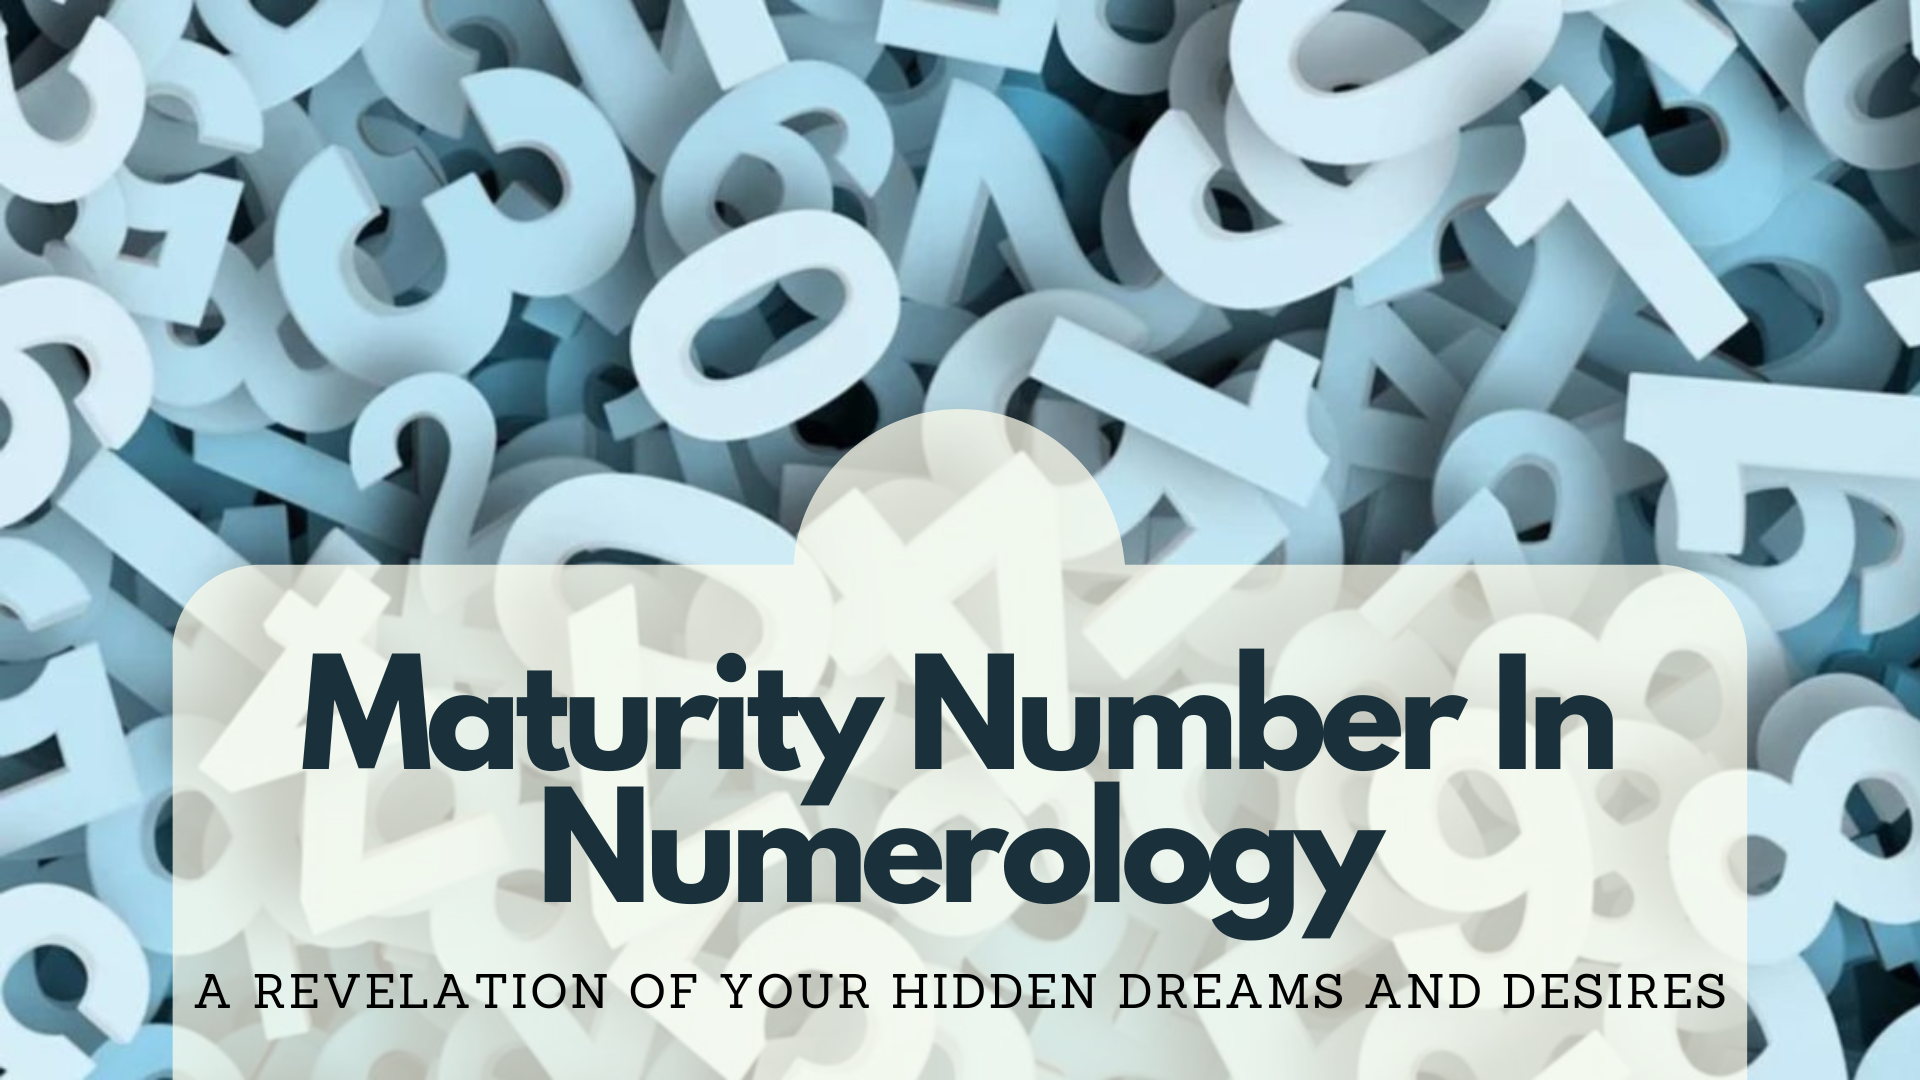 Maturity Number In Numerology - A Revelation Of Your Hidden Dreams And Desires